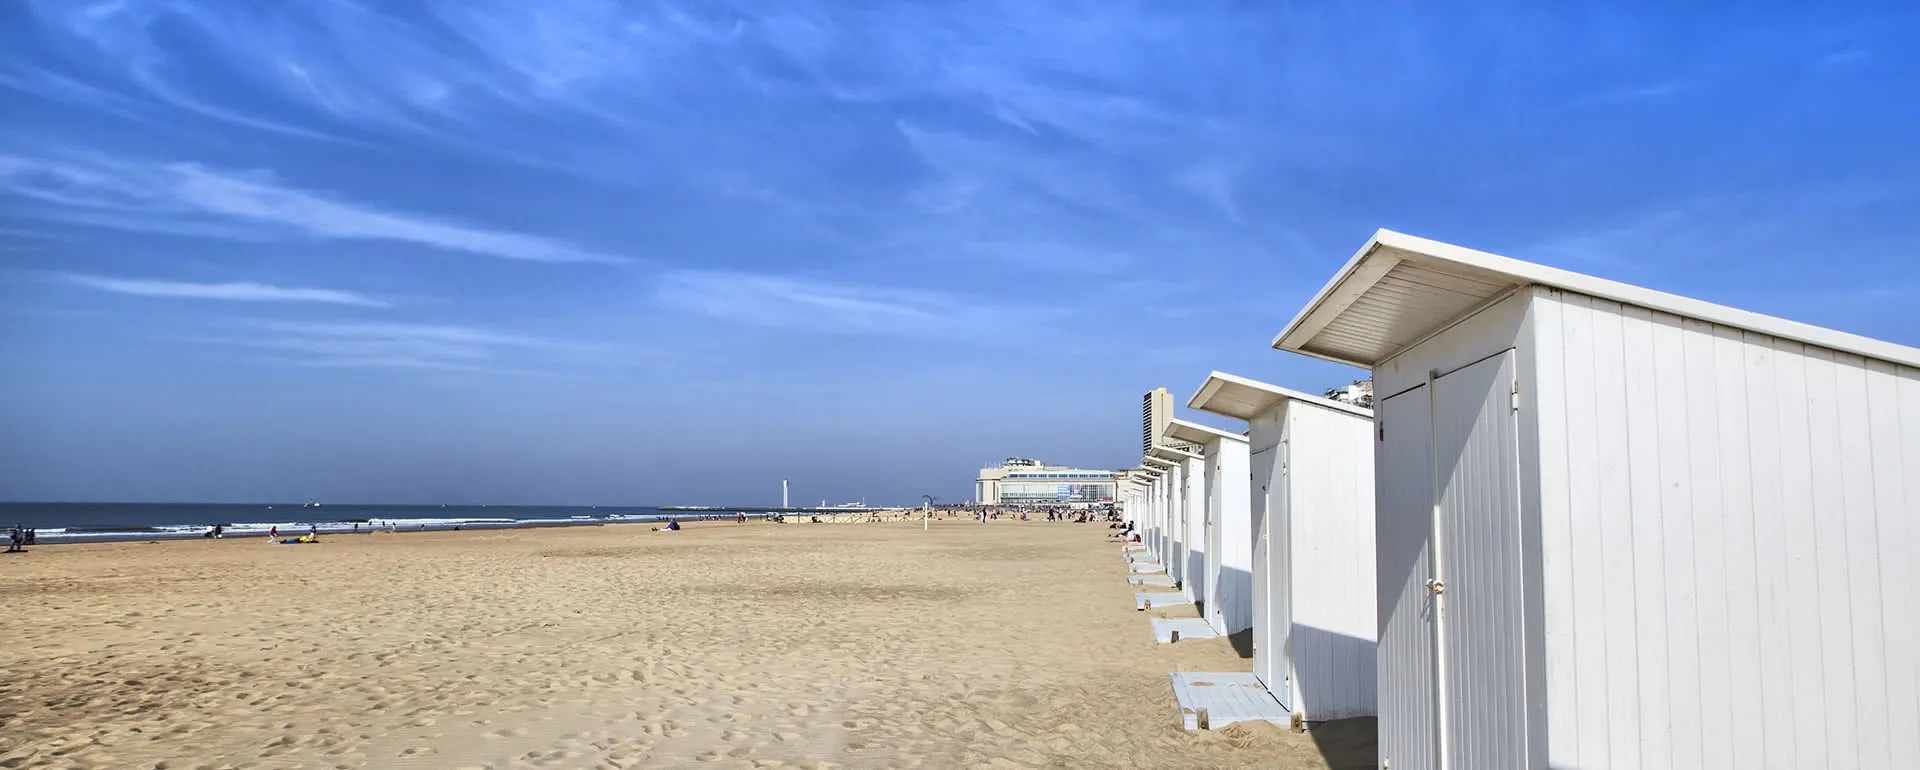 Ostende - the destination with youth hostels